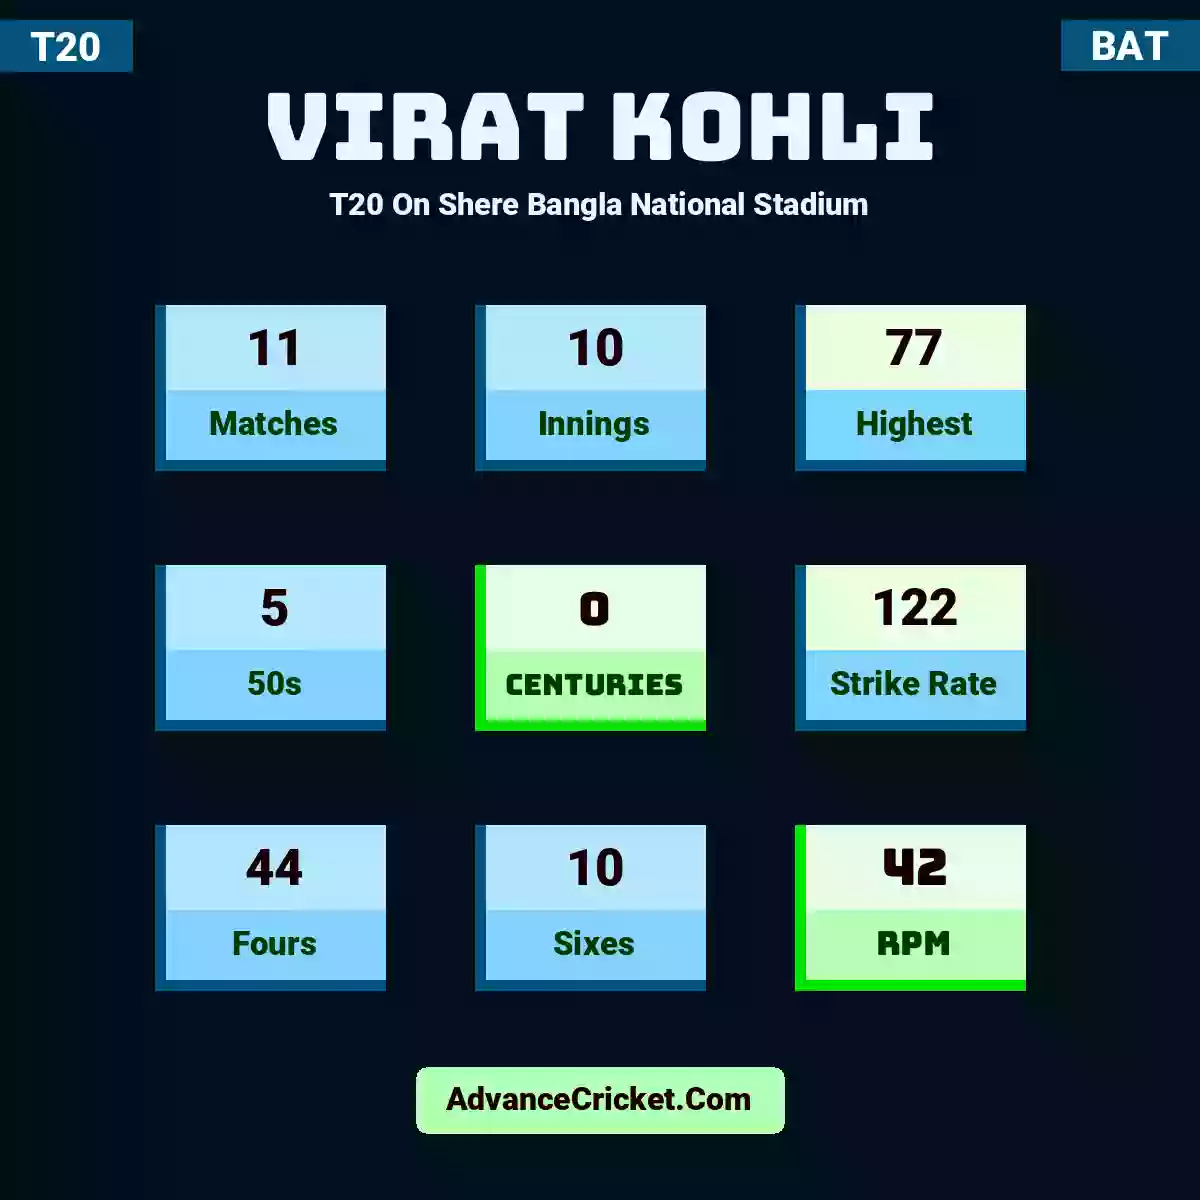 Virat Kohli T20  On Shere Bangla National Stadium, Virat Kohli played 11 matches, scored 77 runs as highest, 5 half-centuries, and 0 centuries, with a strike rate of 122. V.Kohli hit 44 fours and 10 sixes, with an RPM of 42.